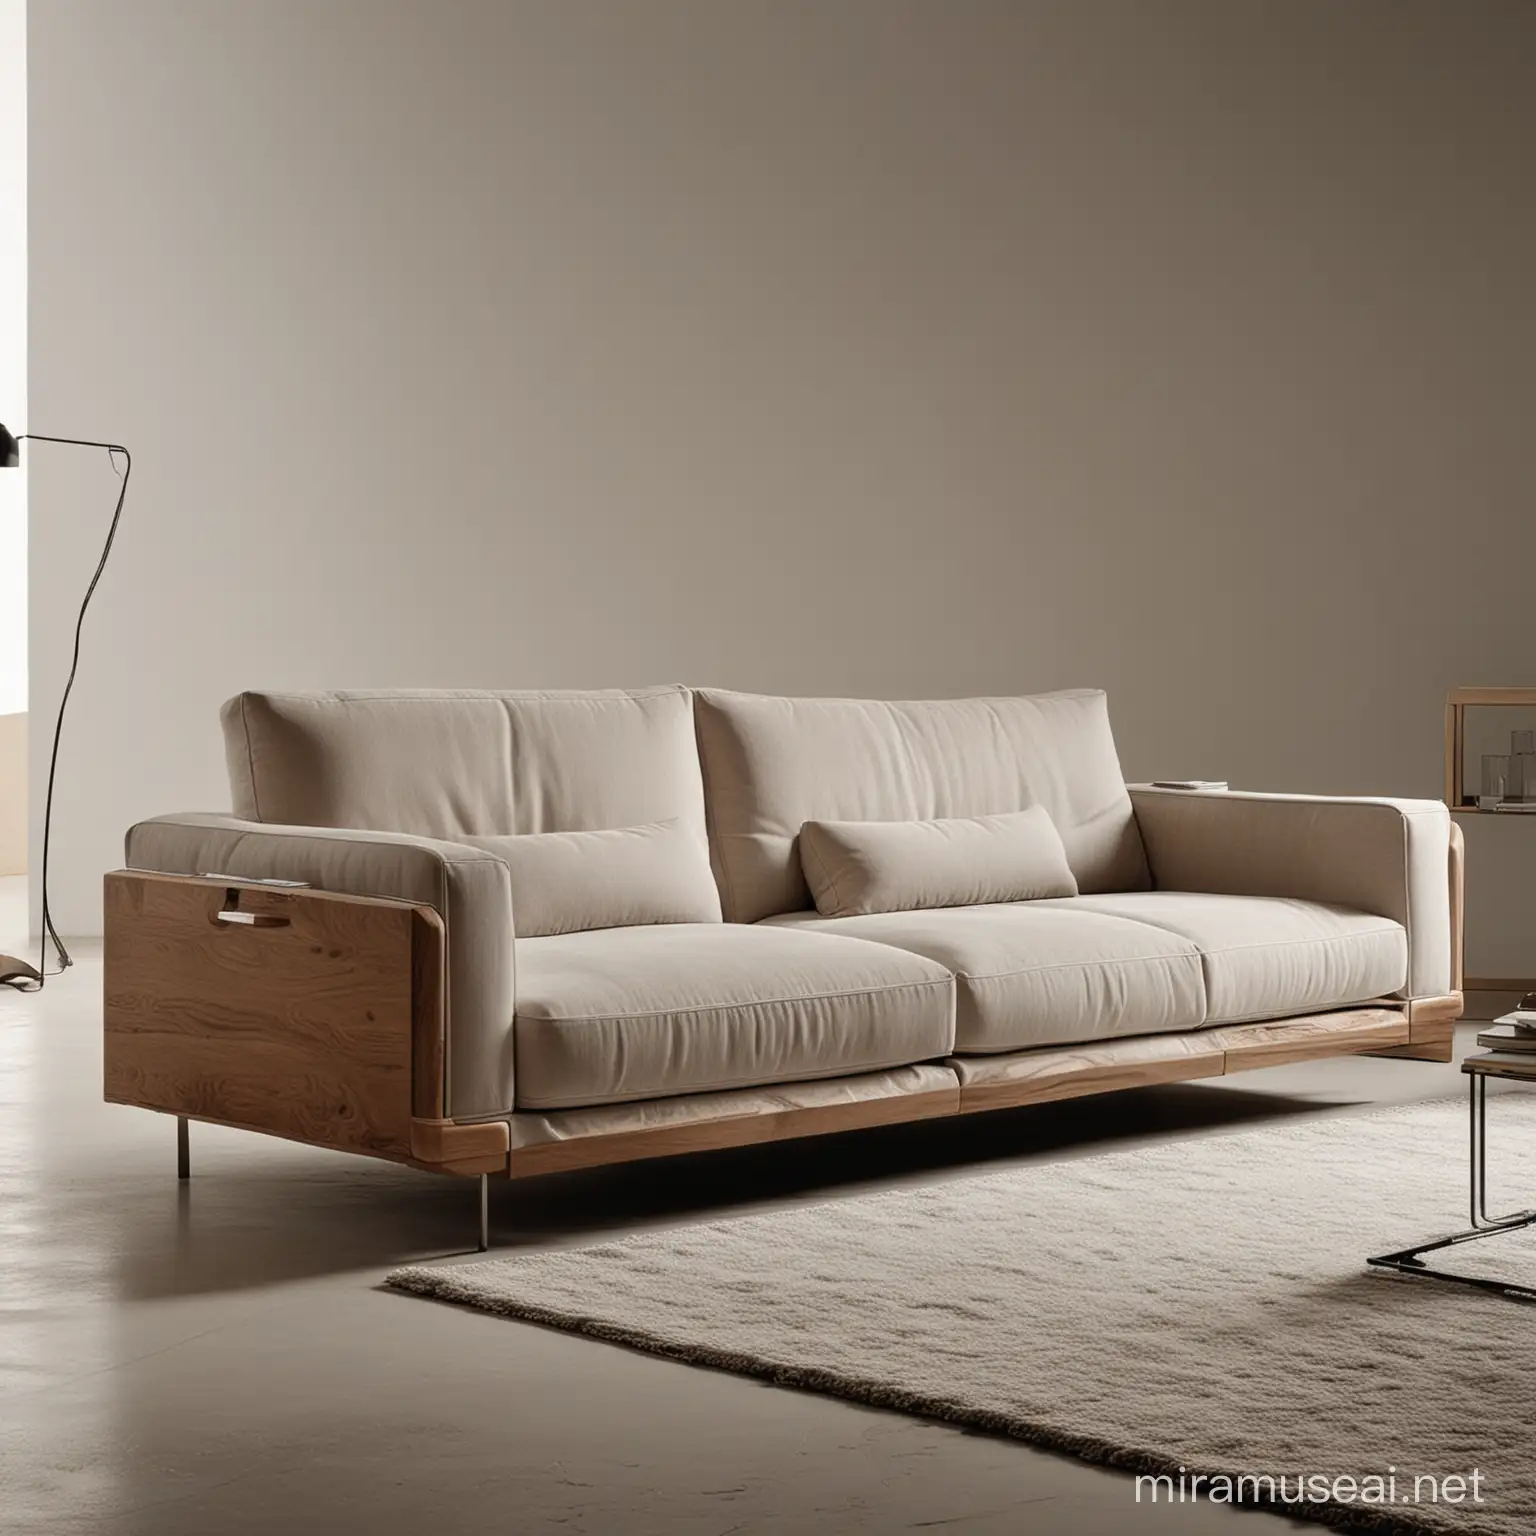 Livingroom like the picture,Petra city,minimalizm,italian sofa,soft lines,wooden label details,mechanism arms And back,Petra city,minimalizm,italian sofa,soft lines,wooden label details,mechanism arms And back,2024 collections,cave.